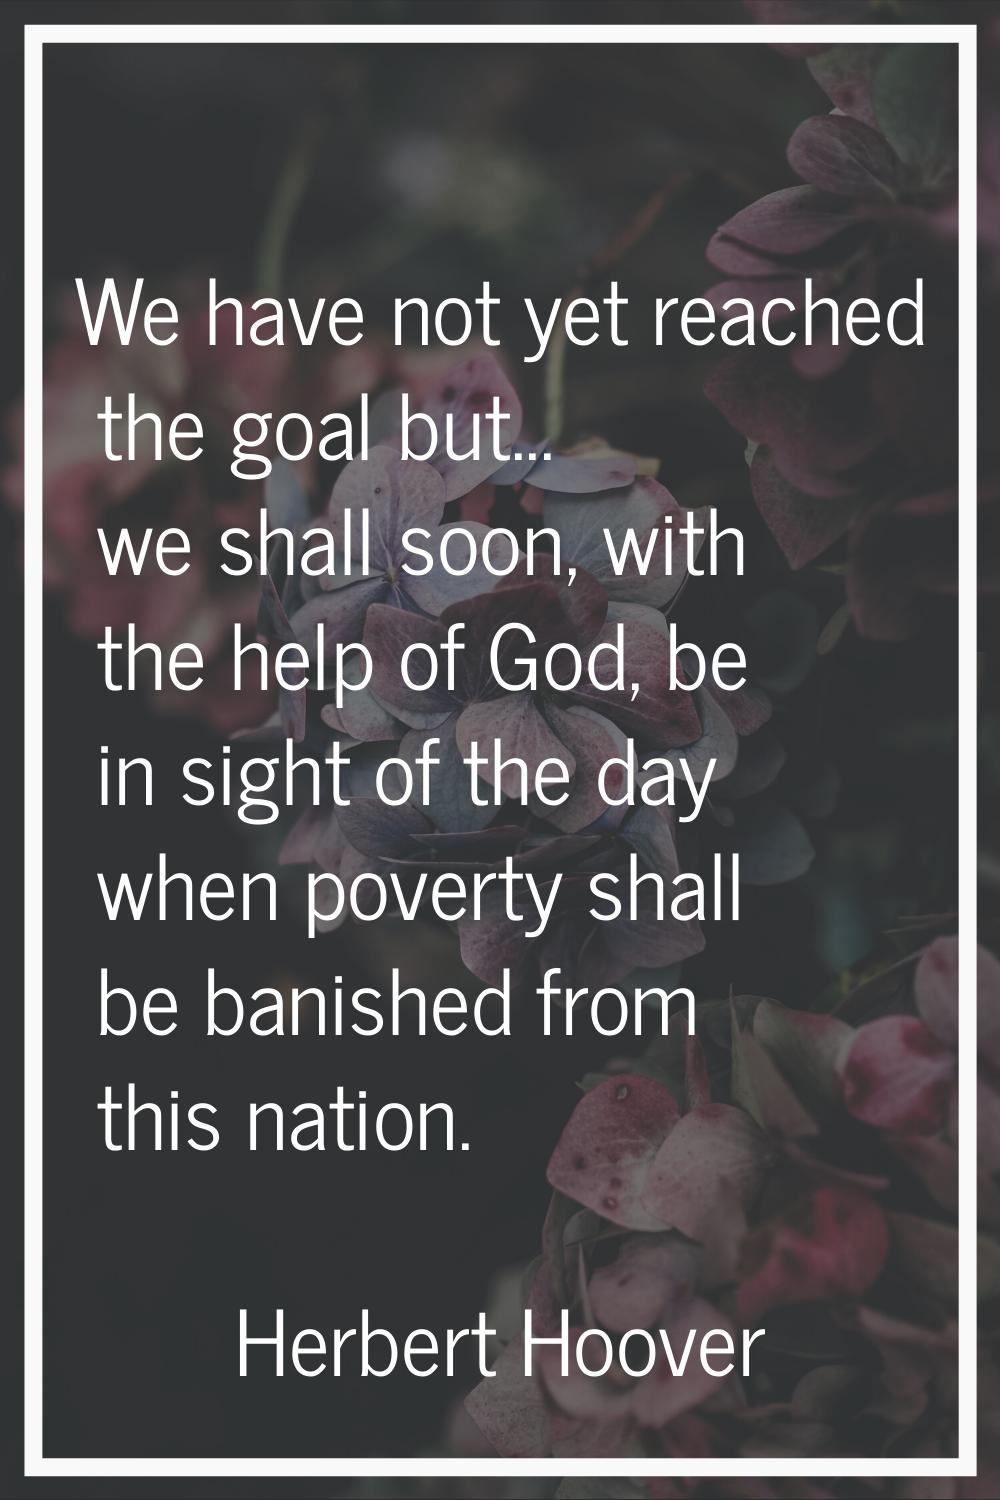 We have not yet reached the goal but... we shall soon, with the help of God, be in sight of the day